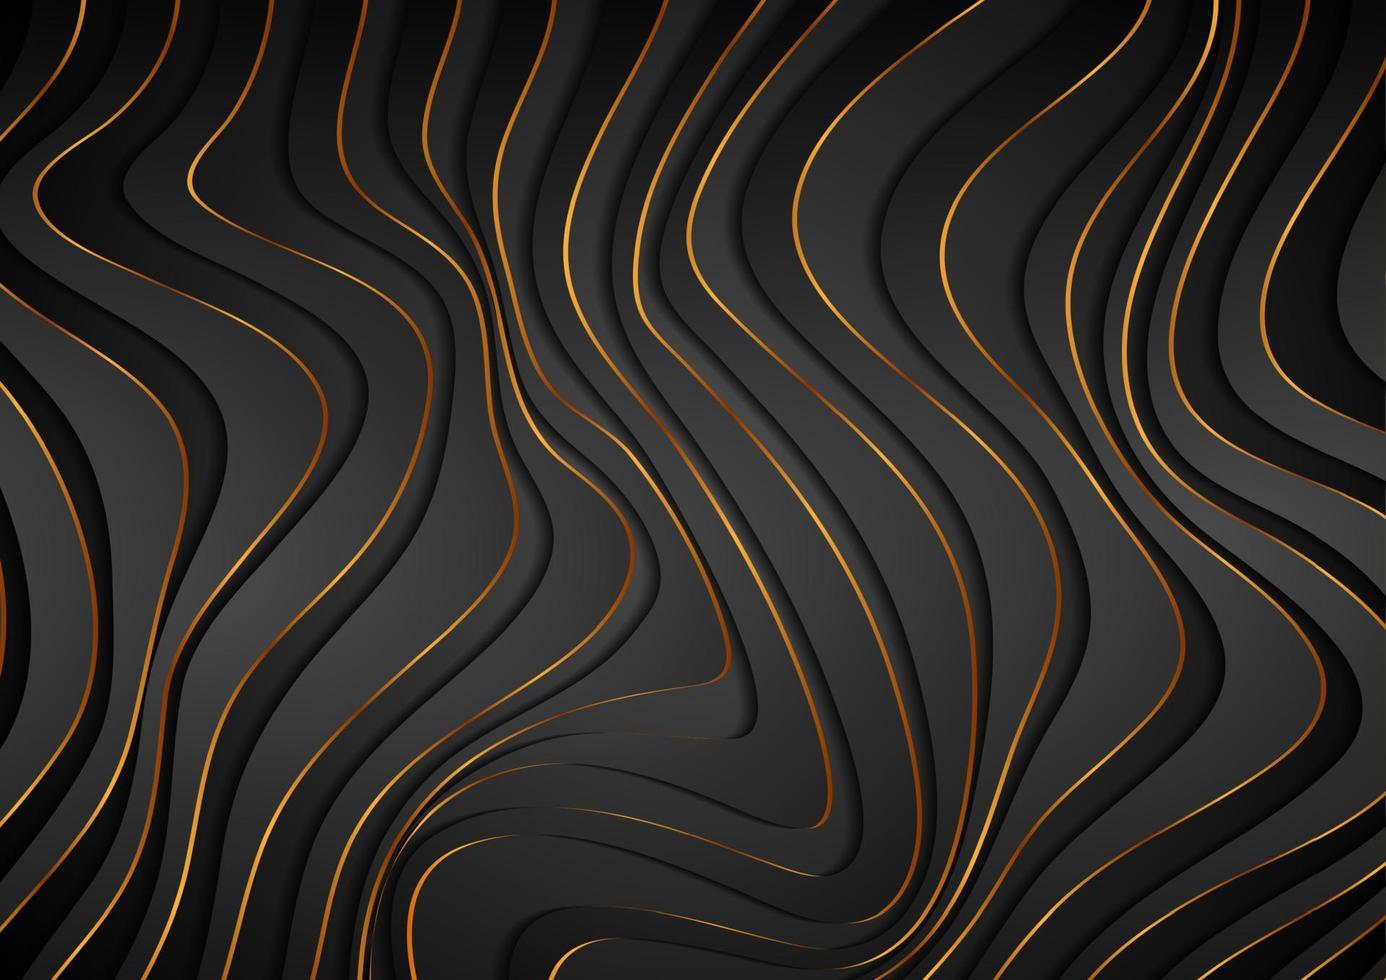 Black and golden curved waves abstract luxury background 22347670 ...